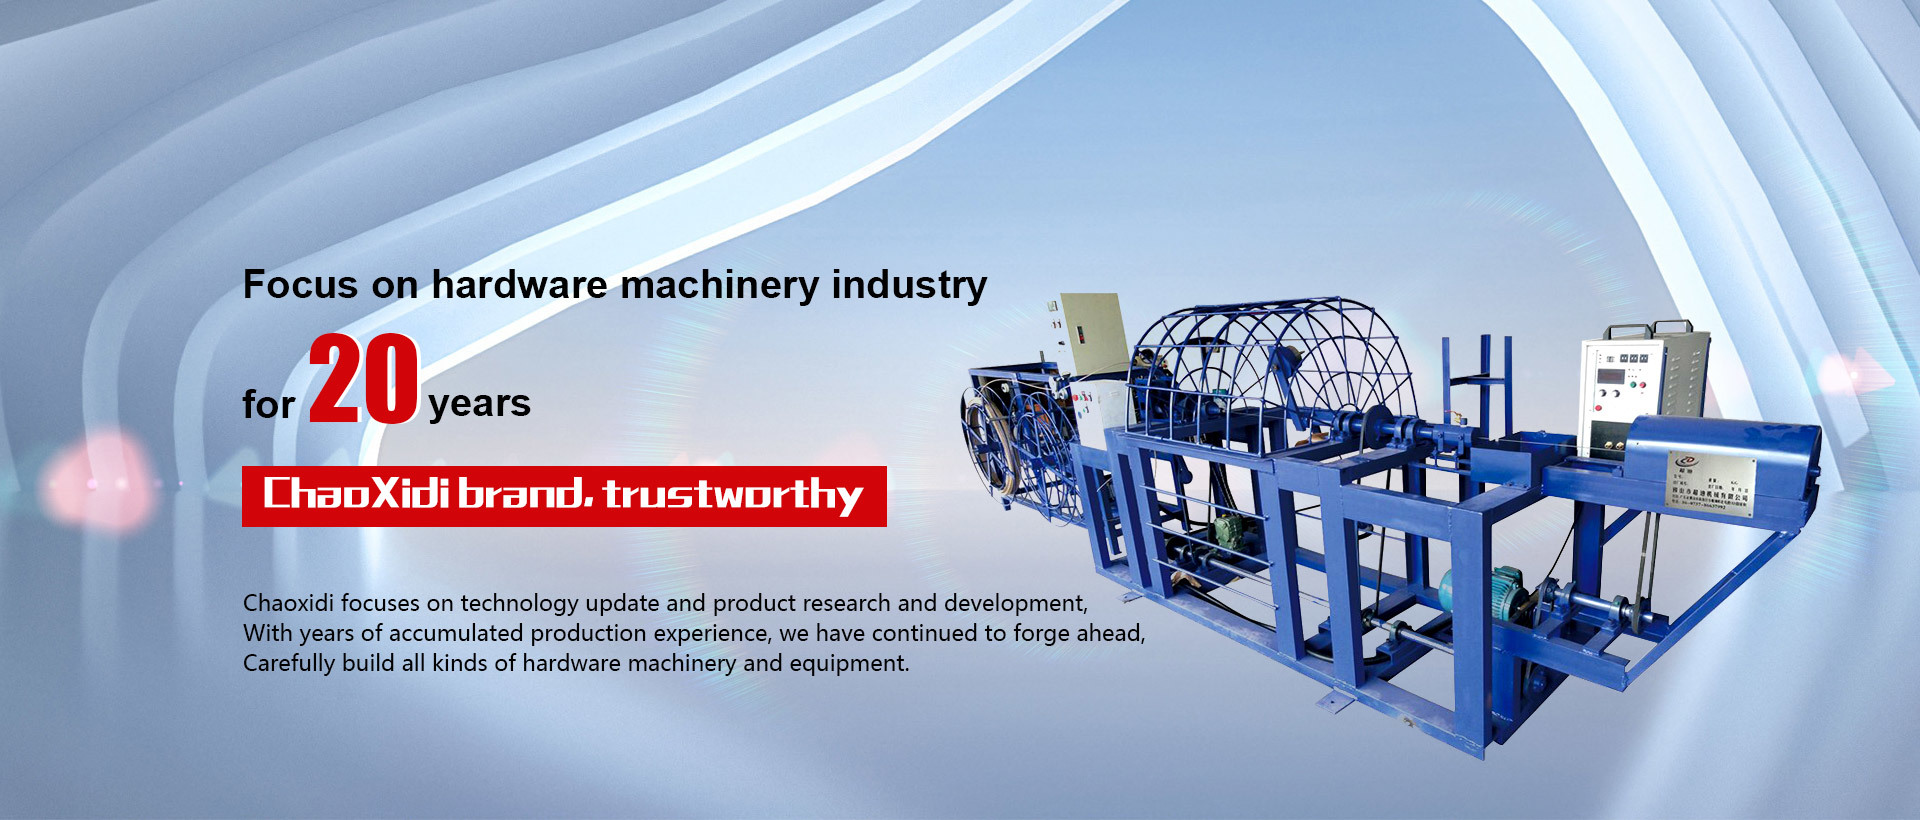 Focus on hardware machinery industry for 20 years